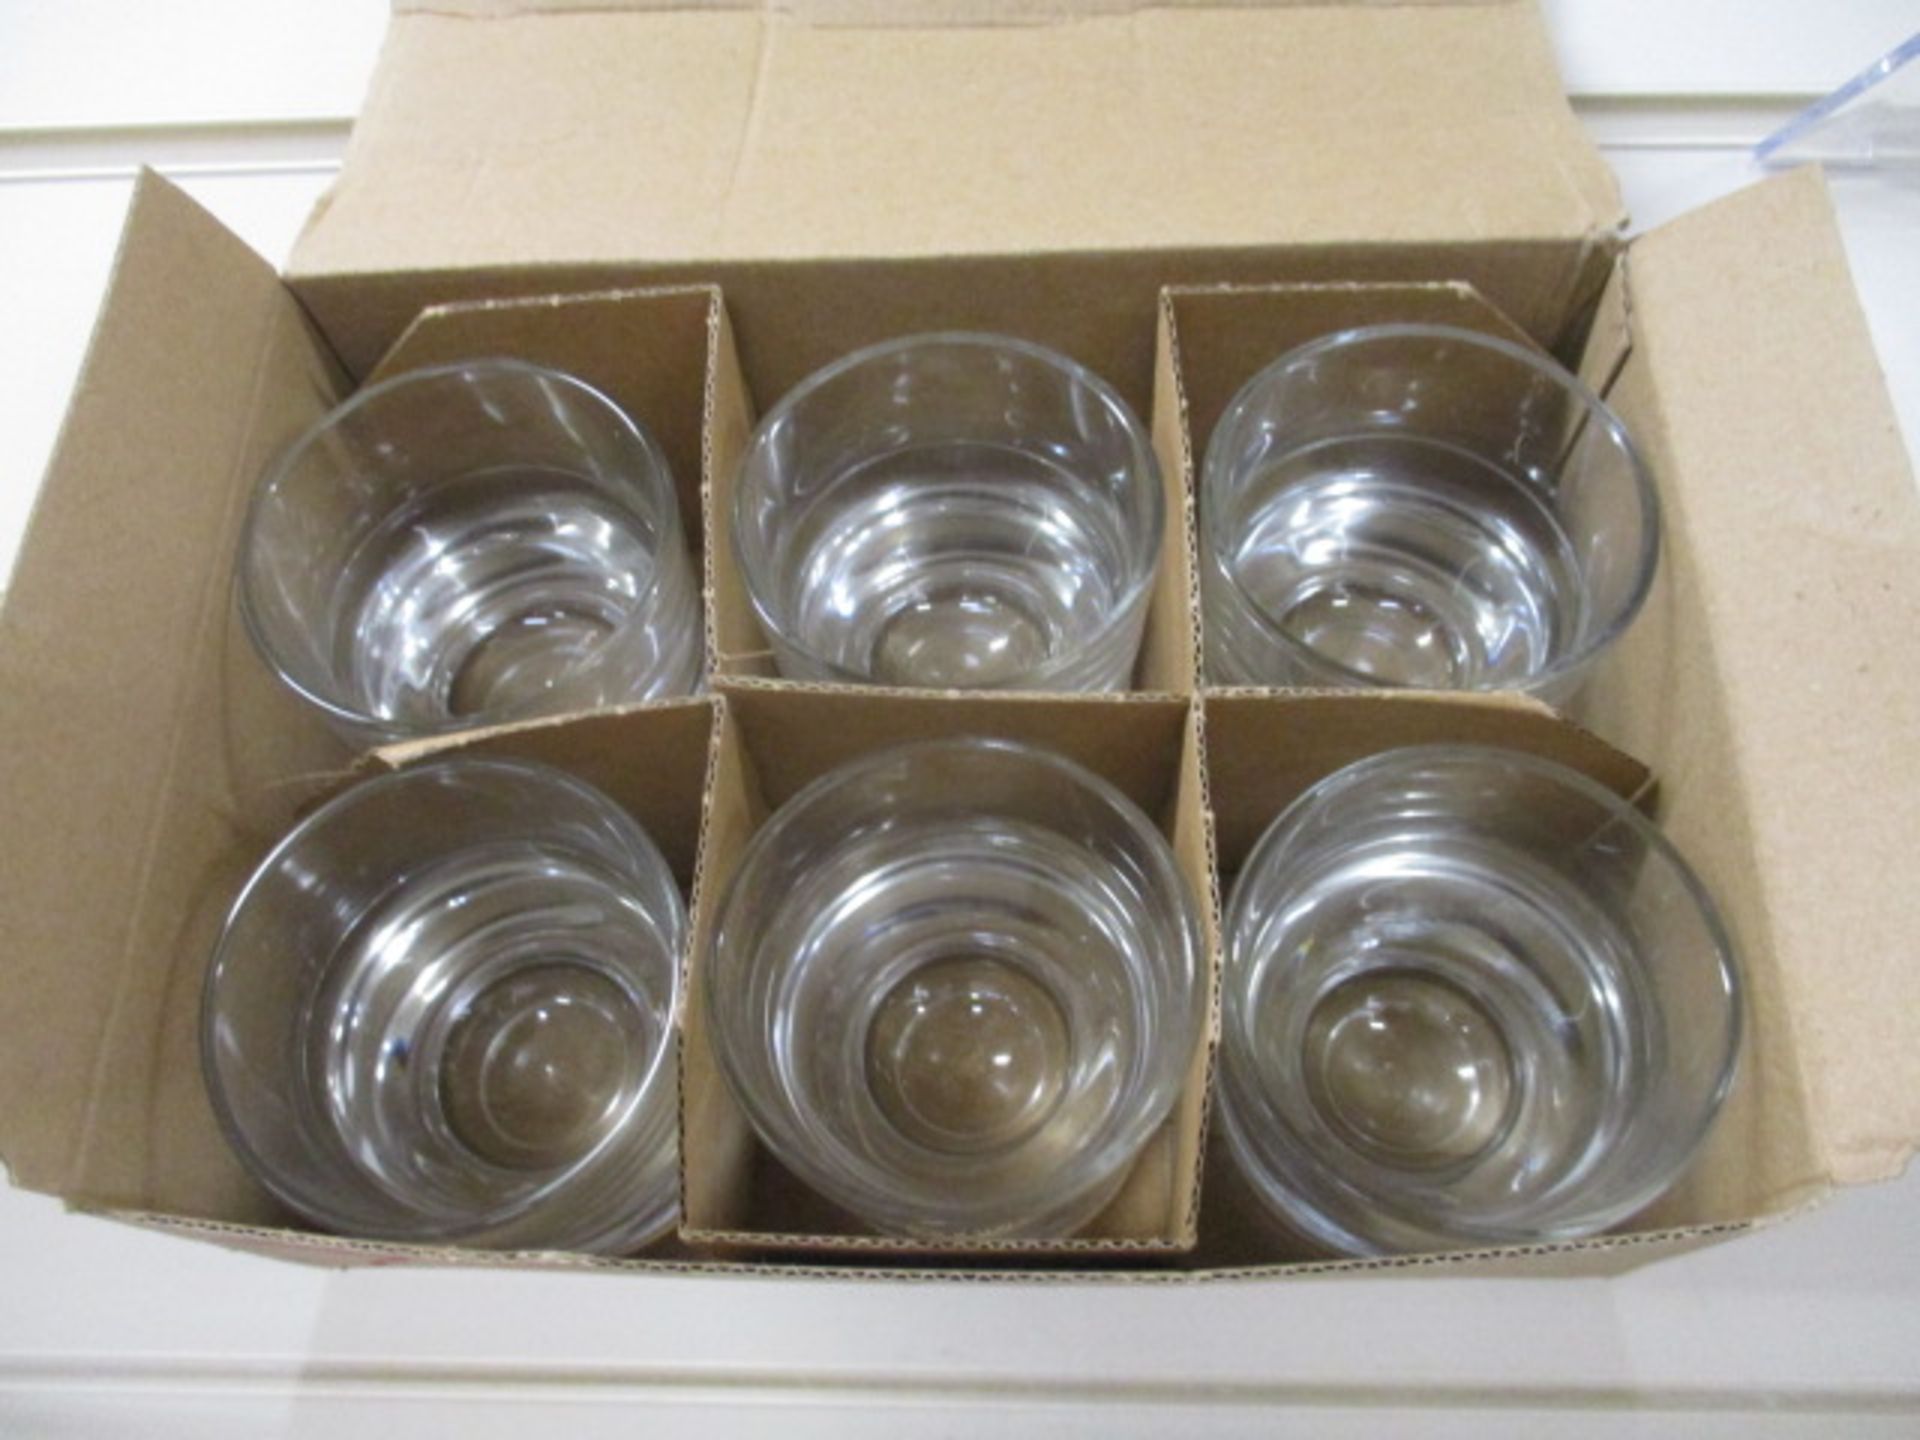 100 x Boxes of Whiskey Glasses w/Heavy Glass Base | 6 pcs per Box | Total RRP £1,000 - Image 3 of 3